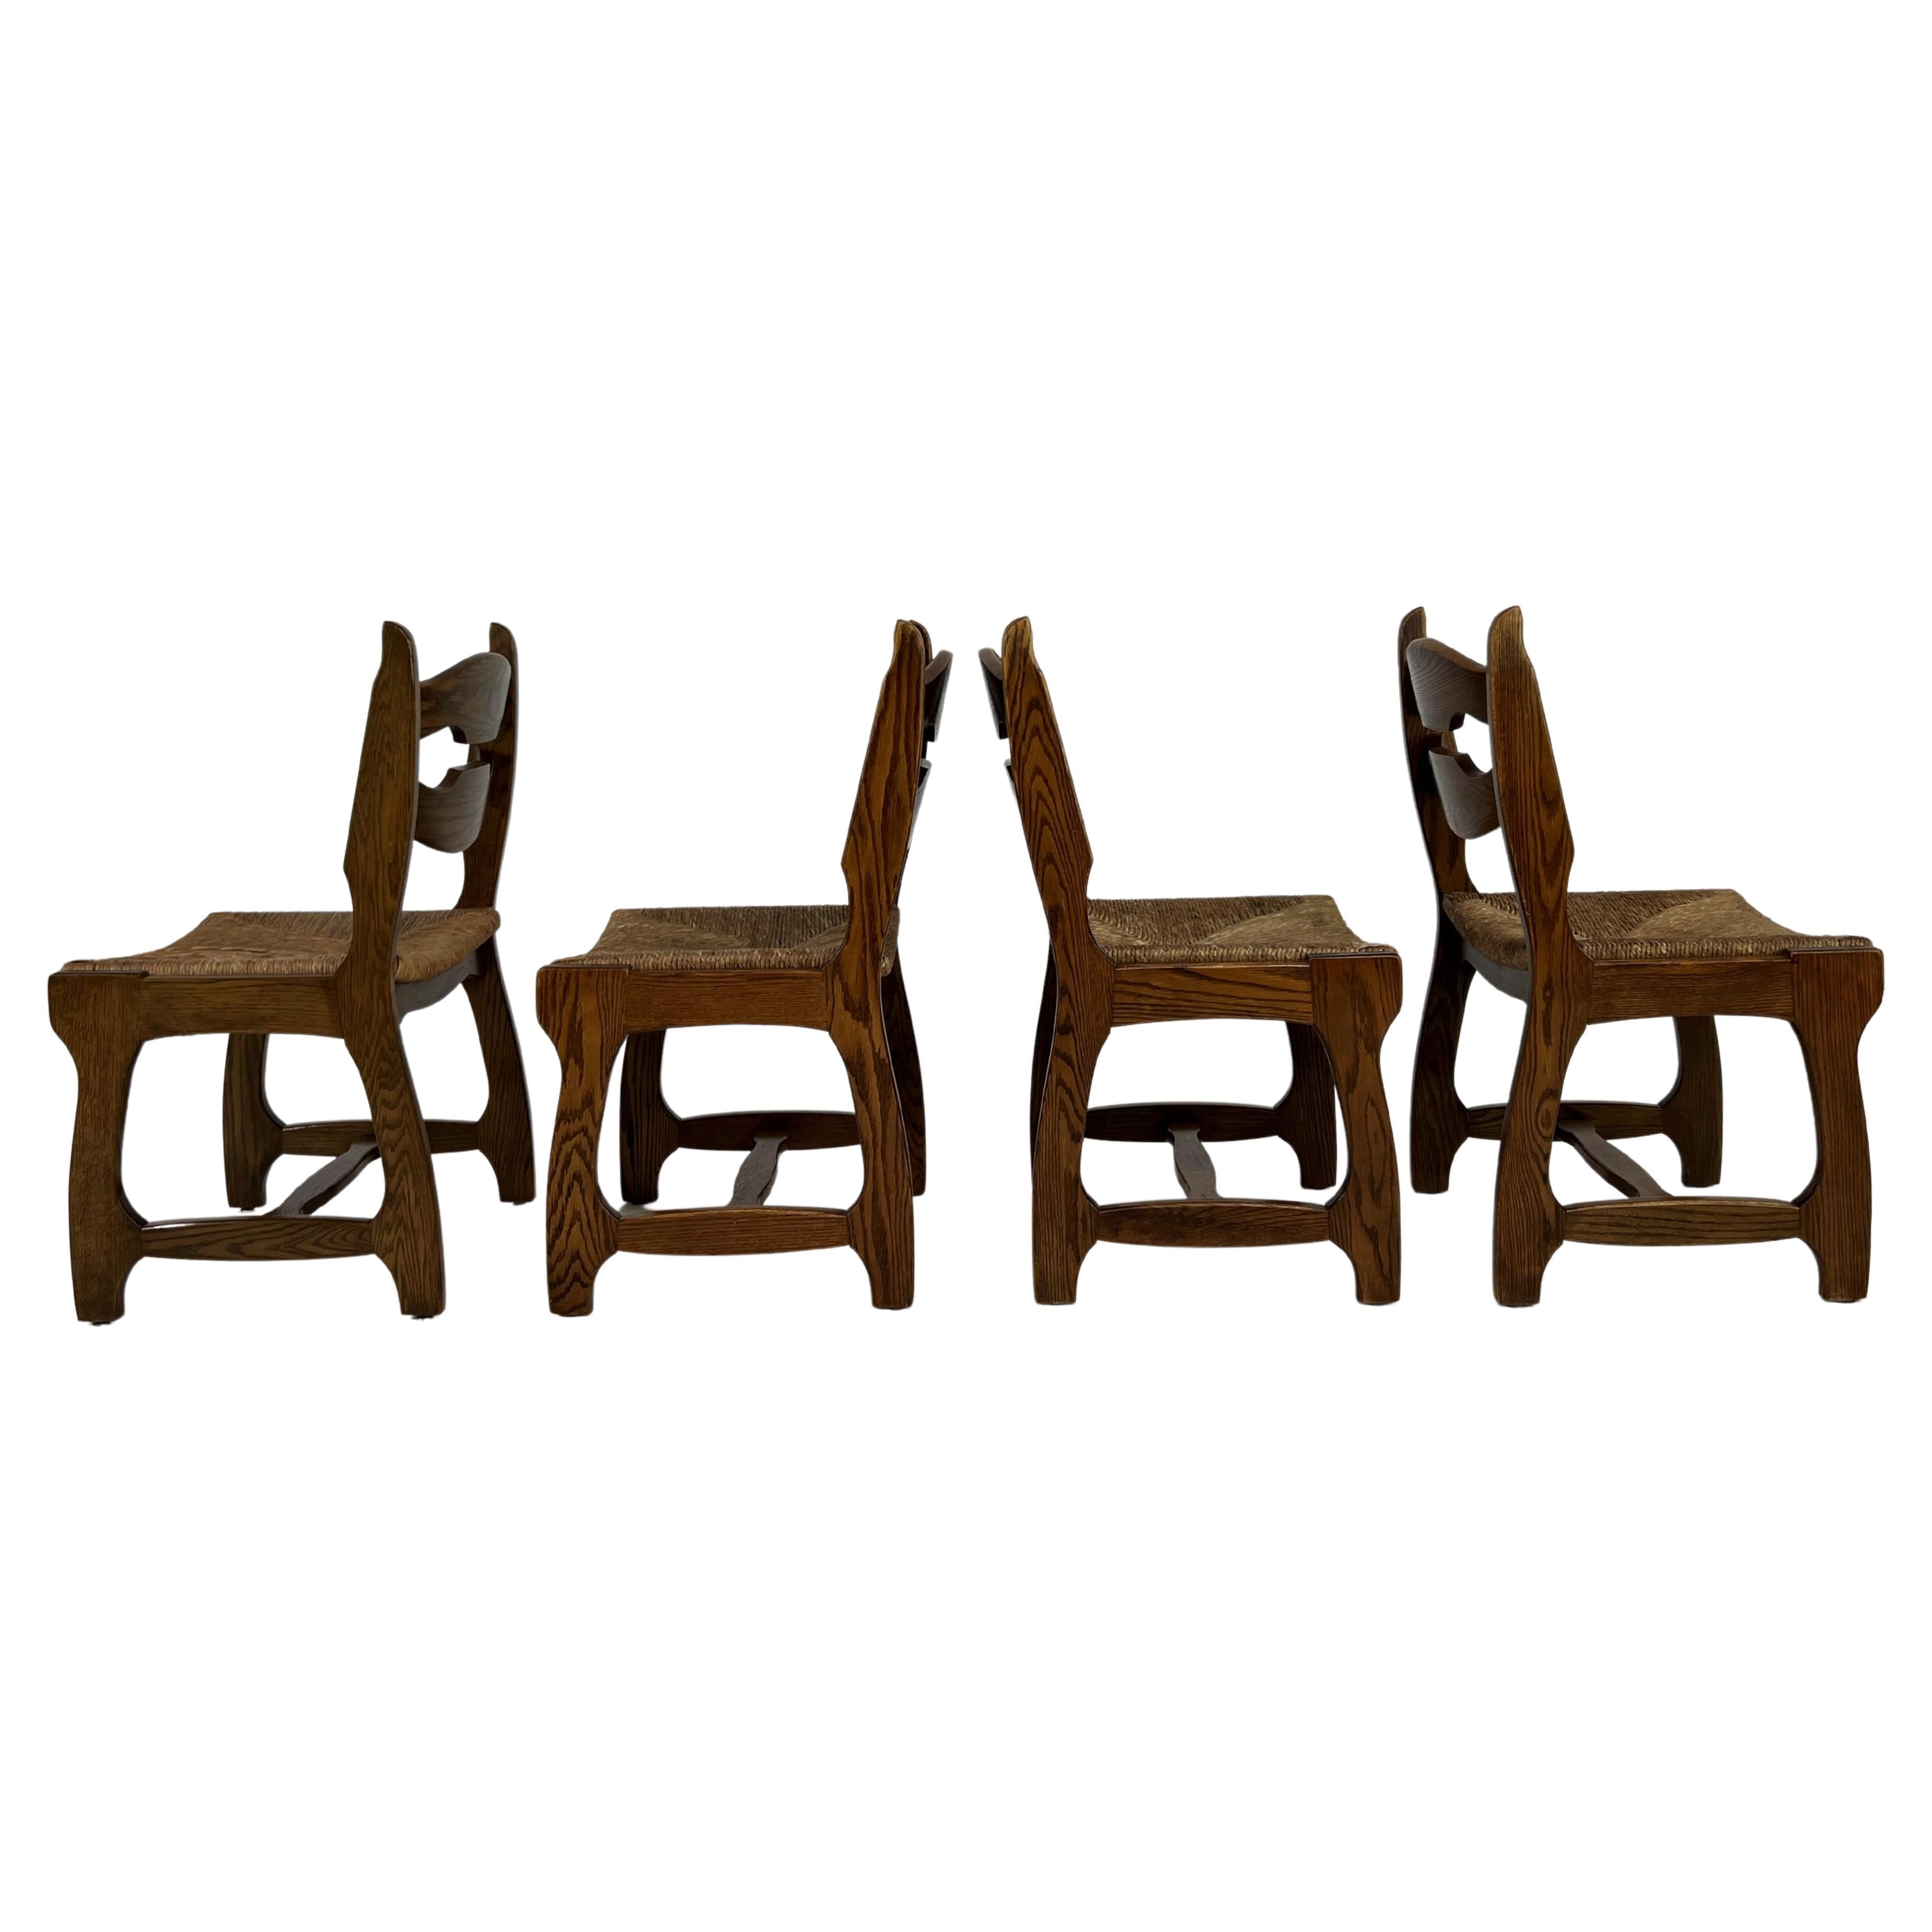 Guillerme & Chambron Oak Wooden And Braided Straw Seats Set of 4 Chairs